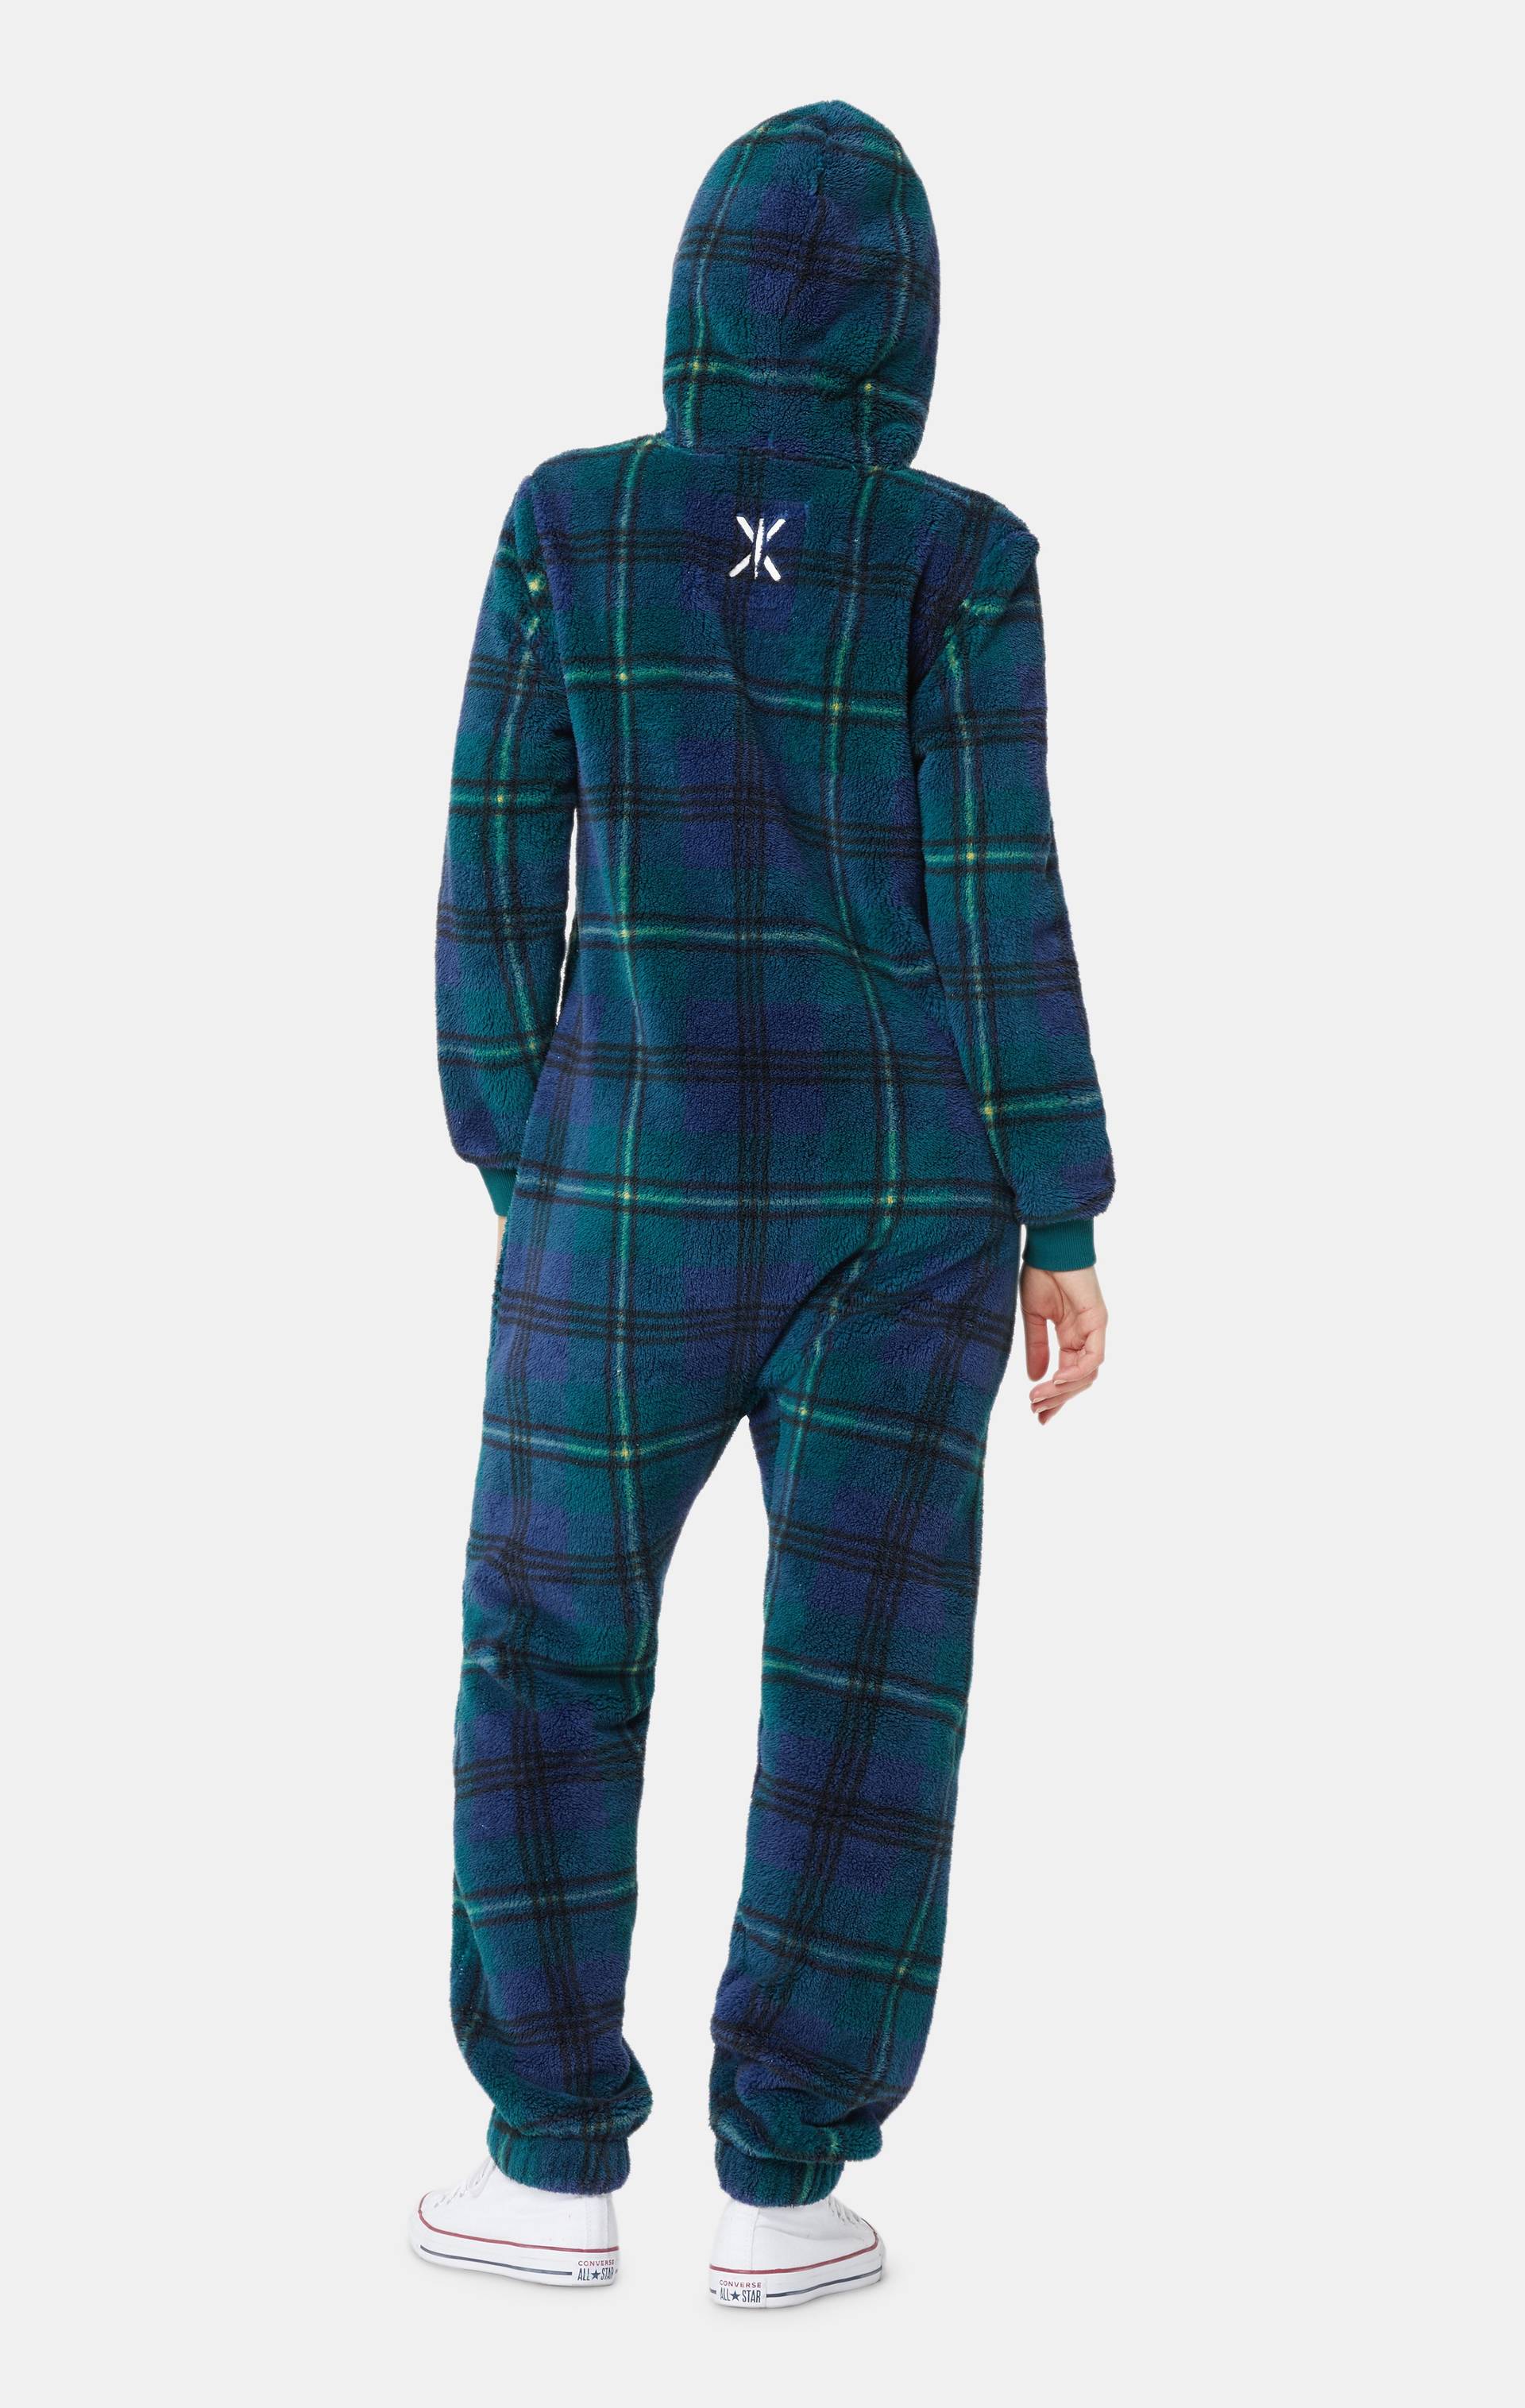 Onepiece The Puppy Jumpsuit Checkered Green - 12